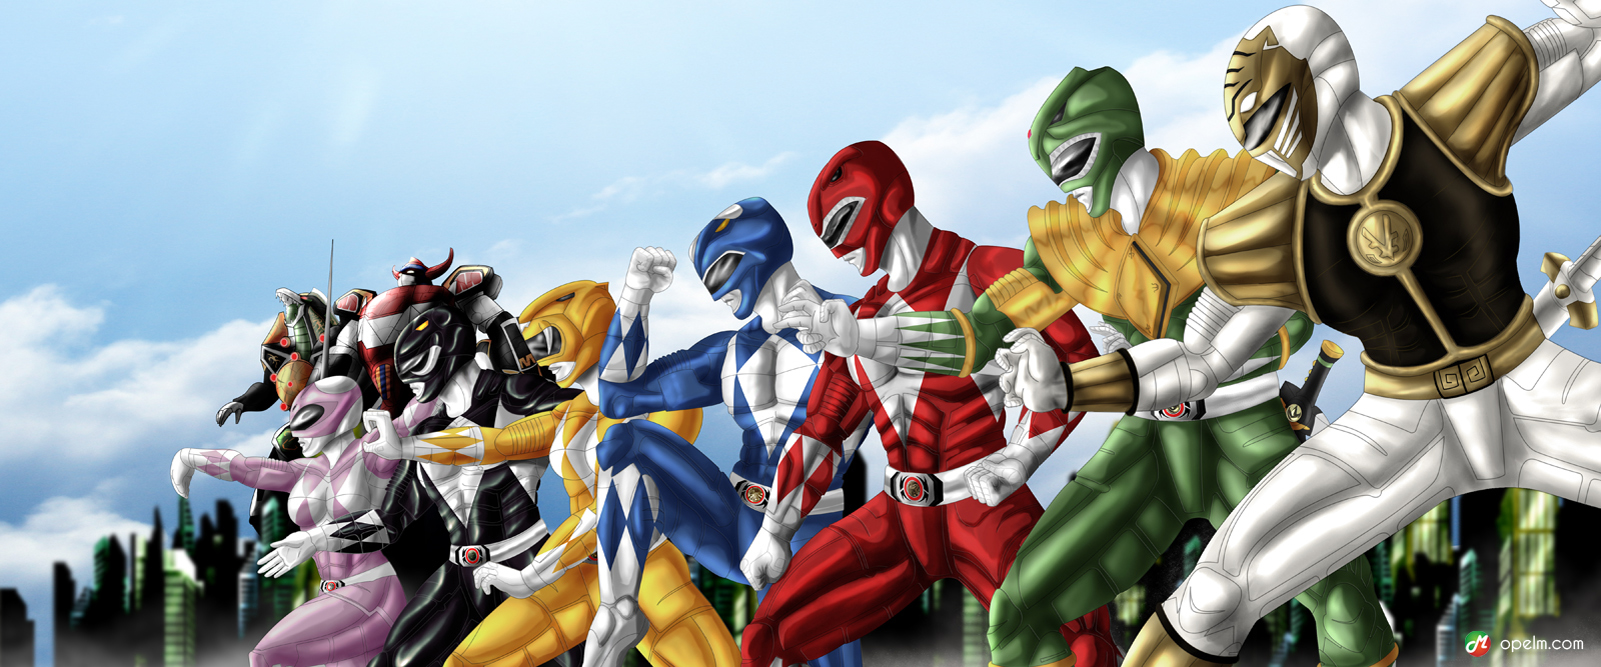 Mmpr With Zords By Gourmandhast Scraps